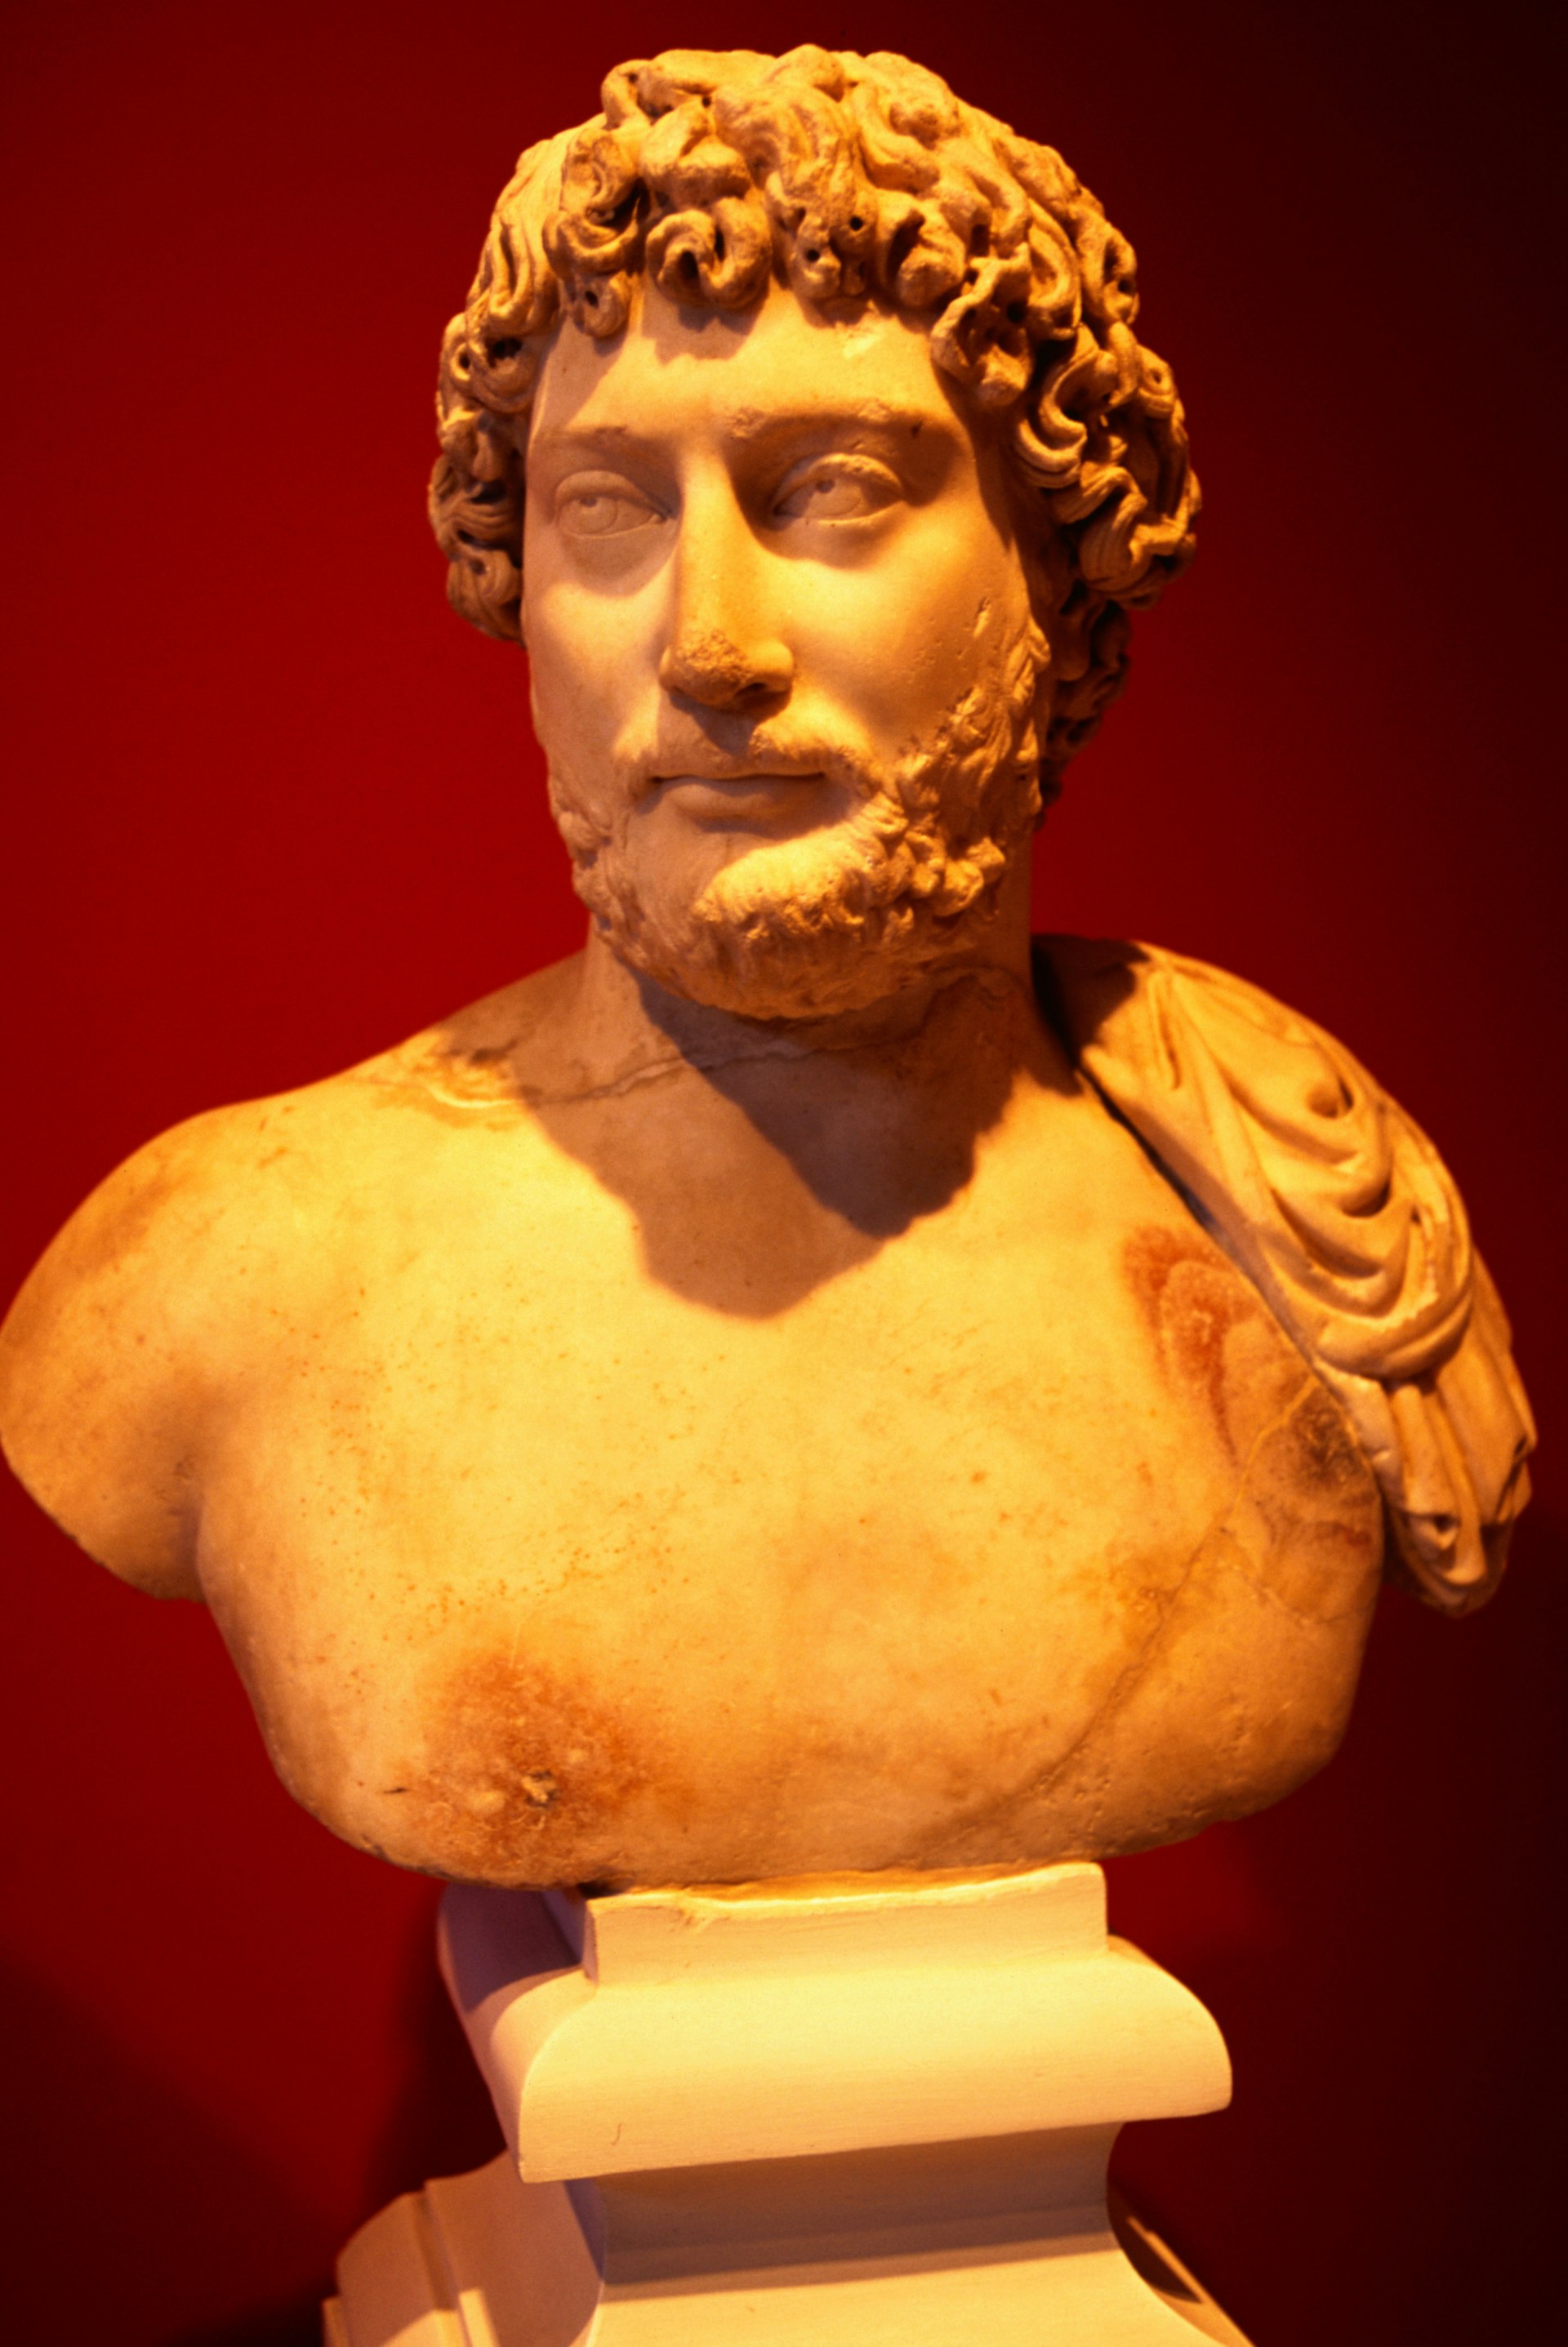 A bust of the Roman emperor Hadrian in the National Archaeological Museum in Athens